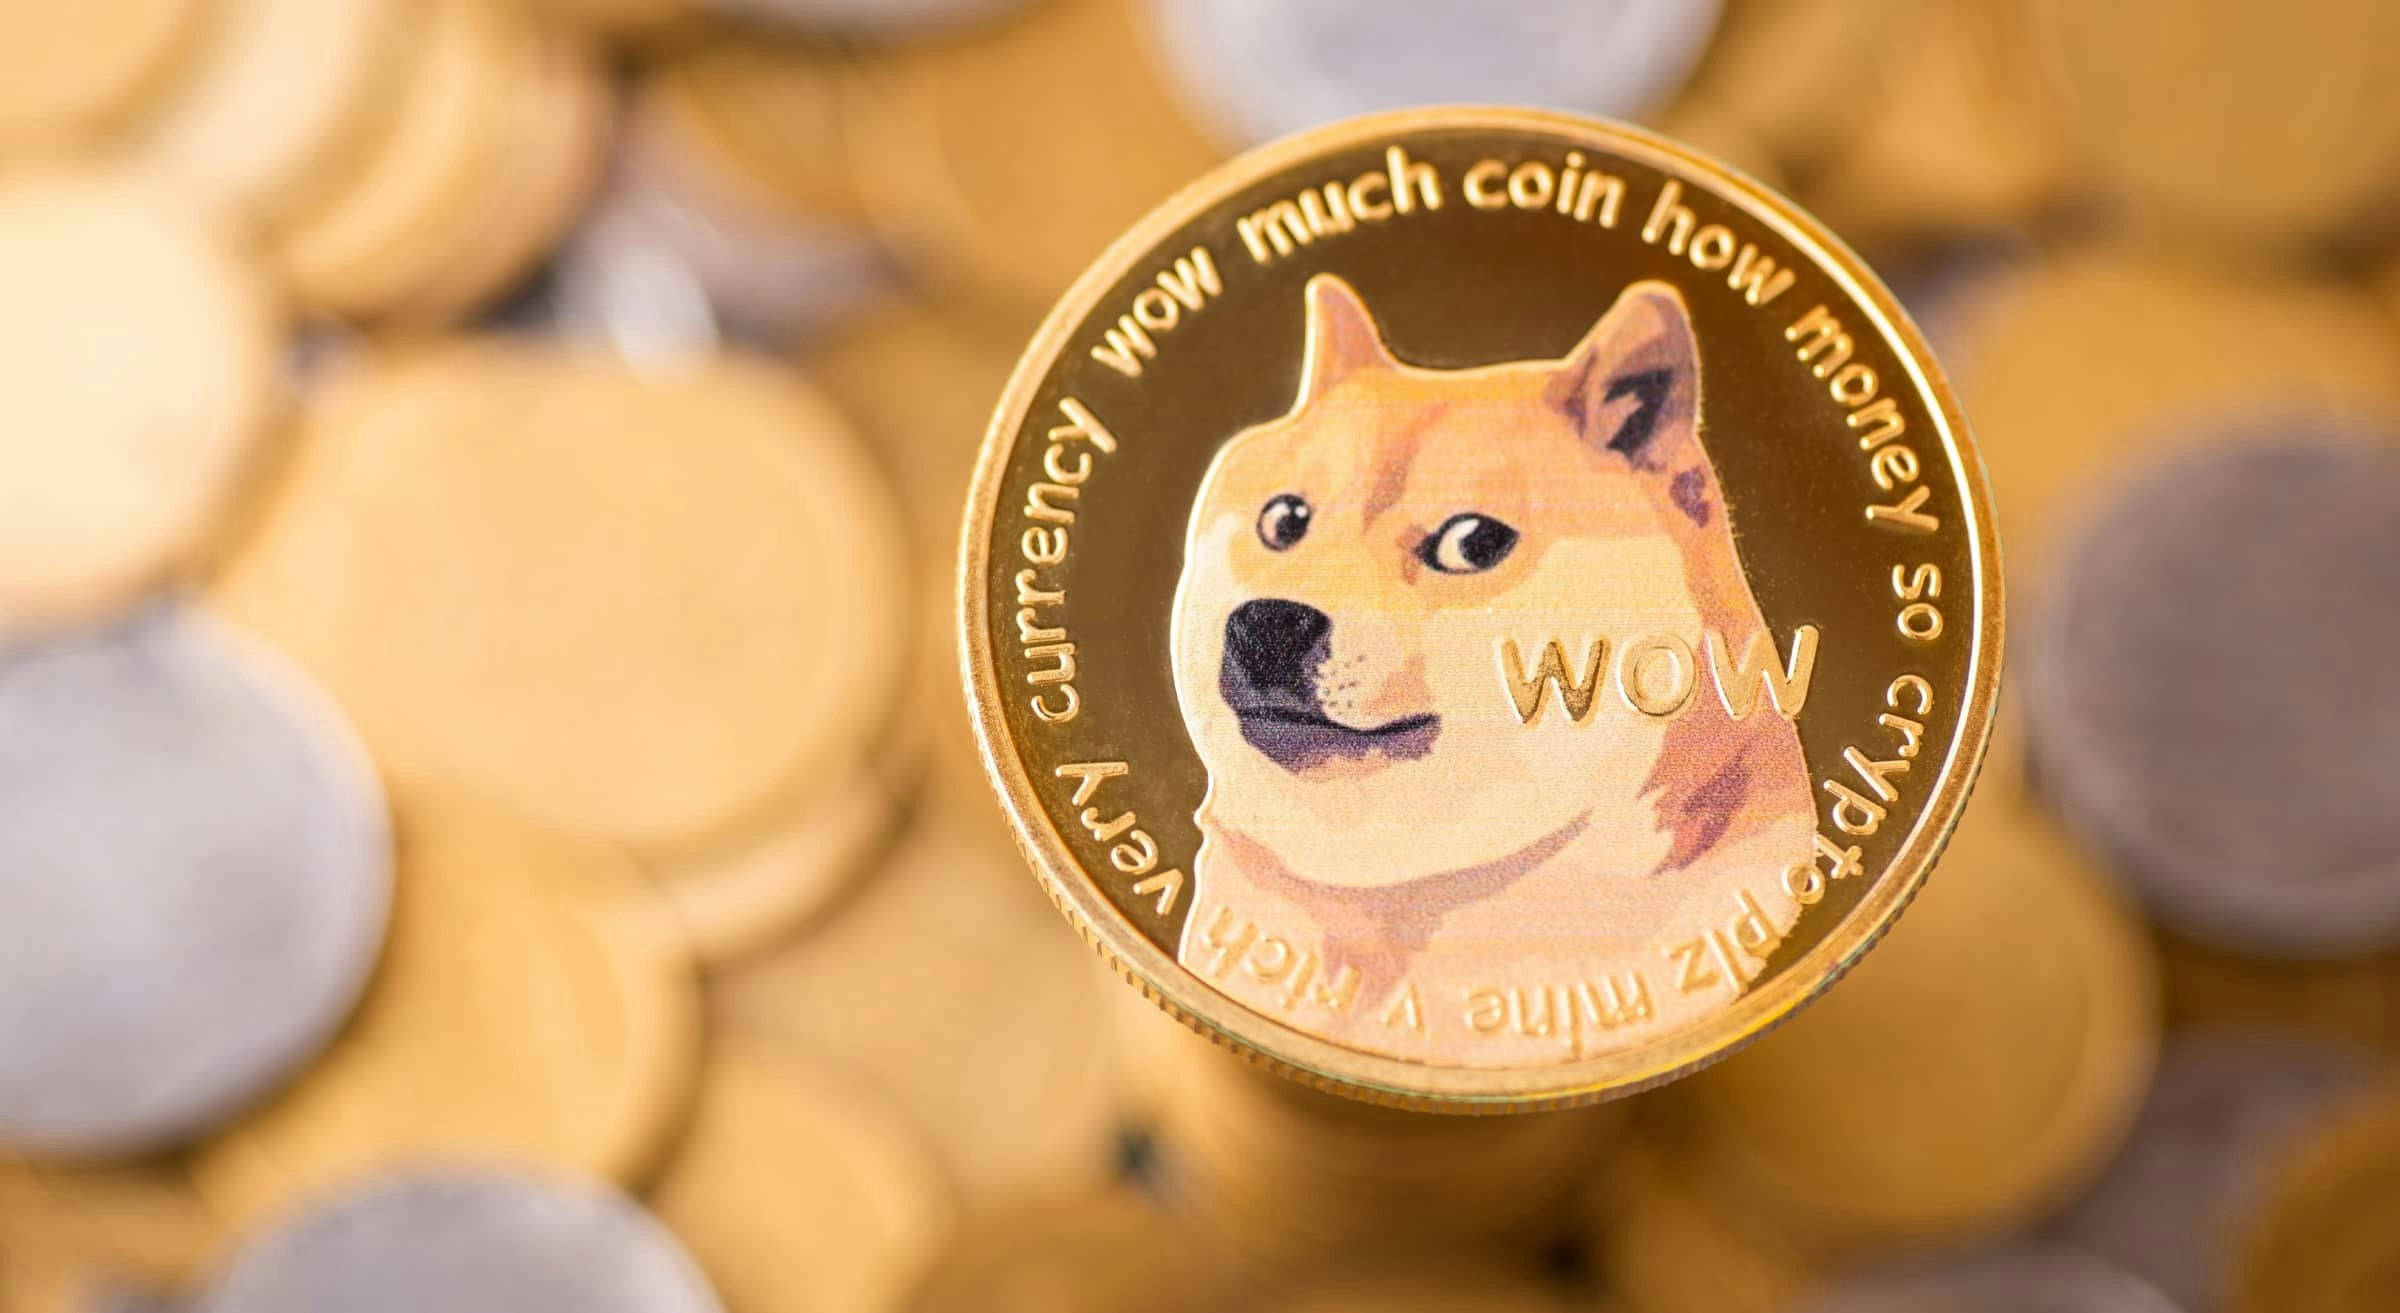 The Dogecoin casino experience: Much wow entertainment